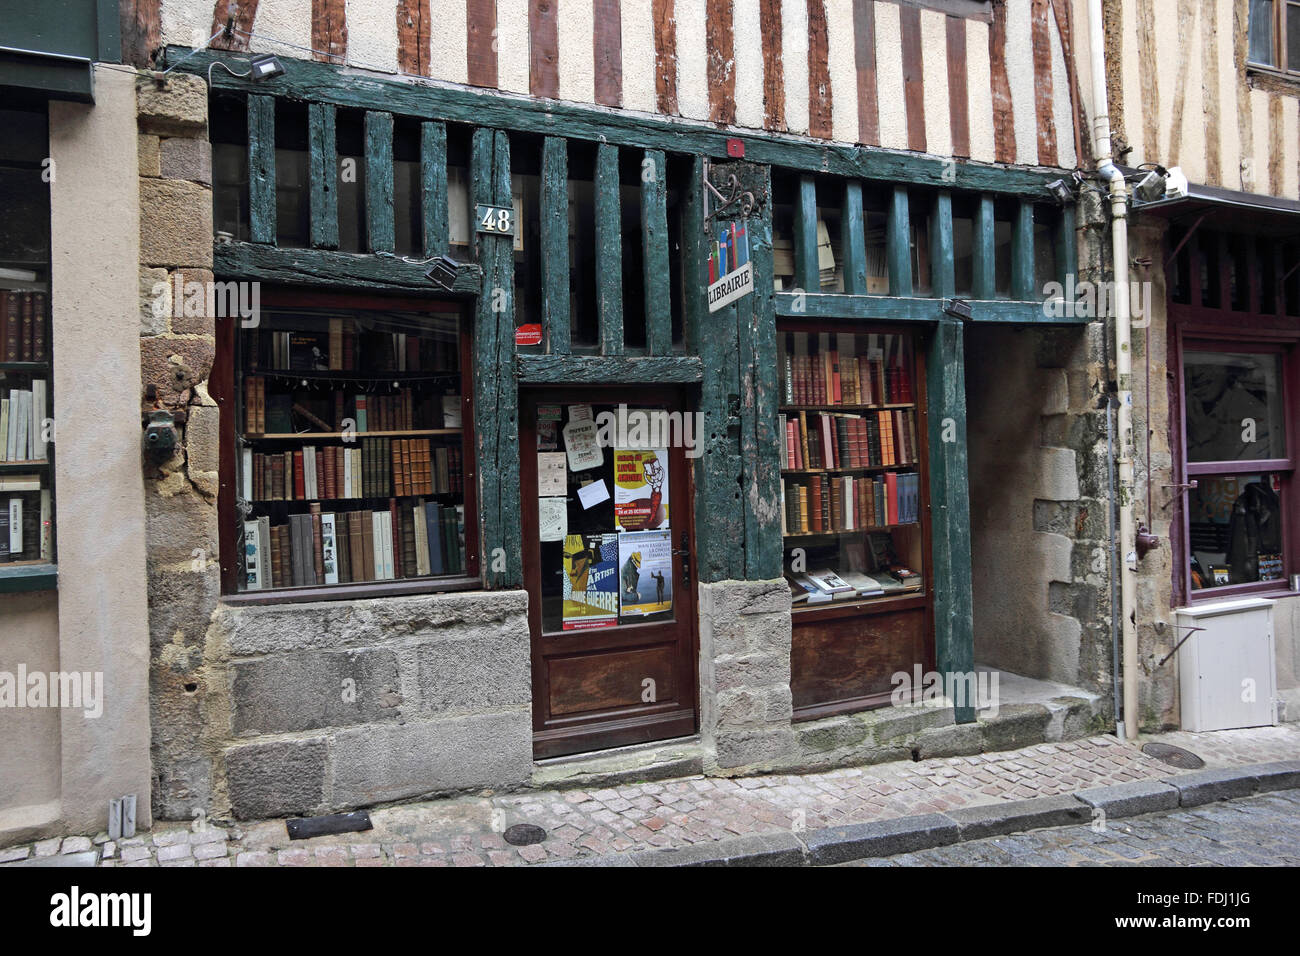 Librairie bookshop, selling old books, Limoges, France Stock Photo